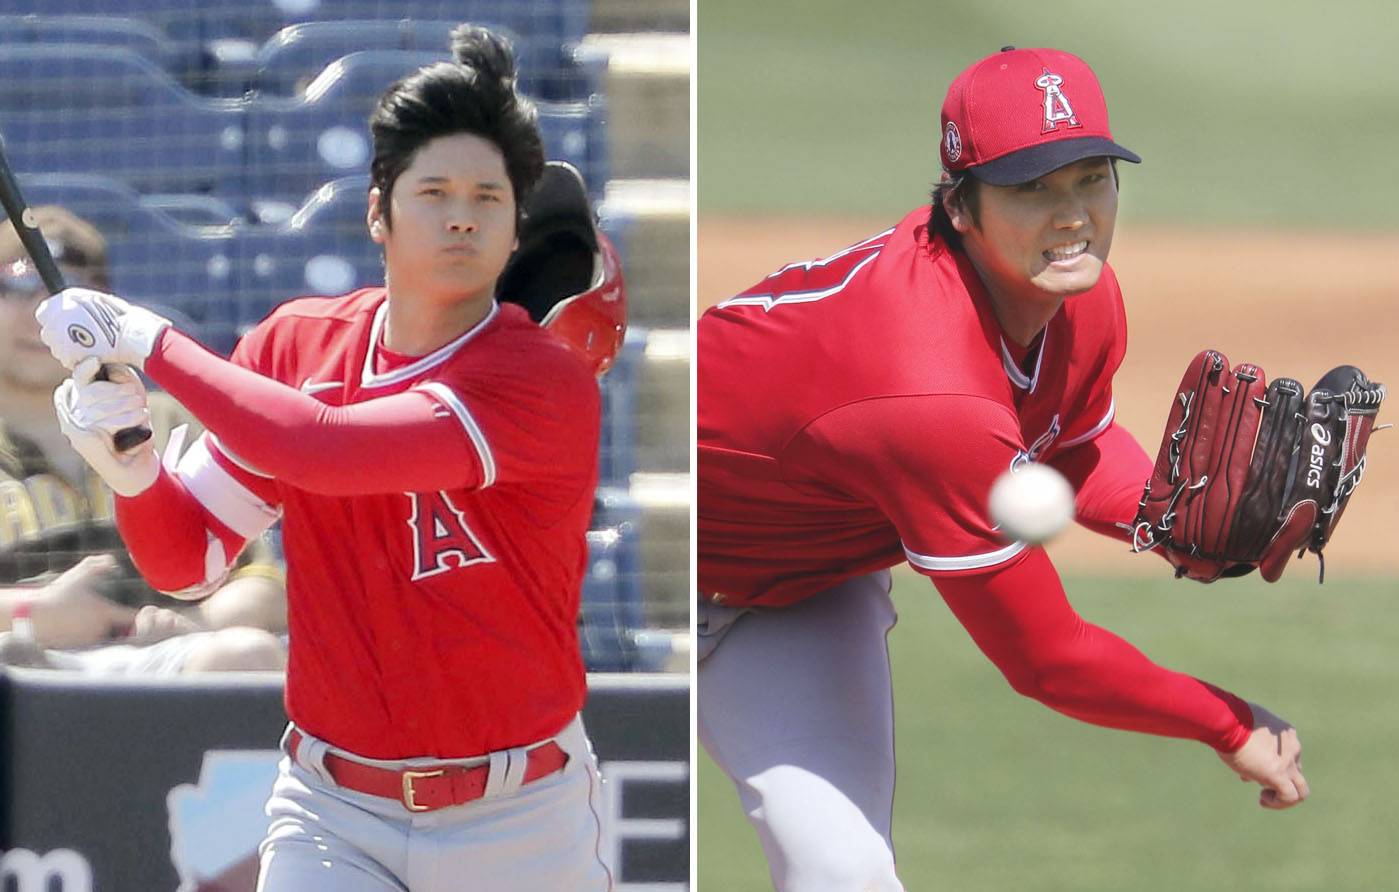 Shohei Ohtani puts on show in dual role as starter and leadoff